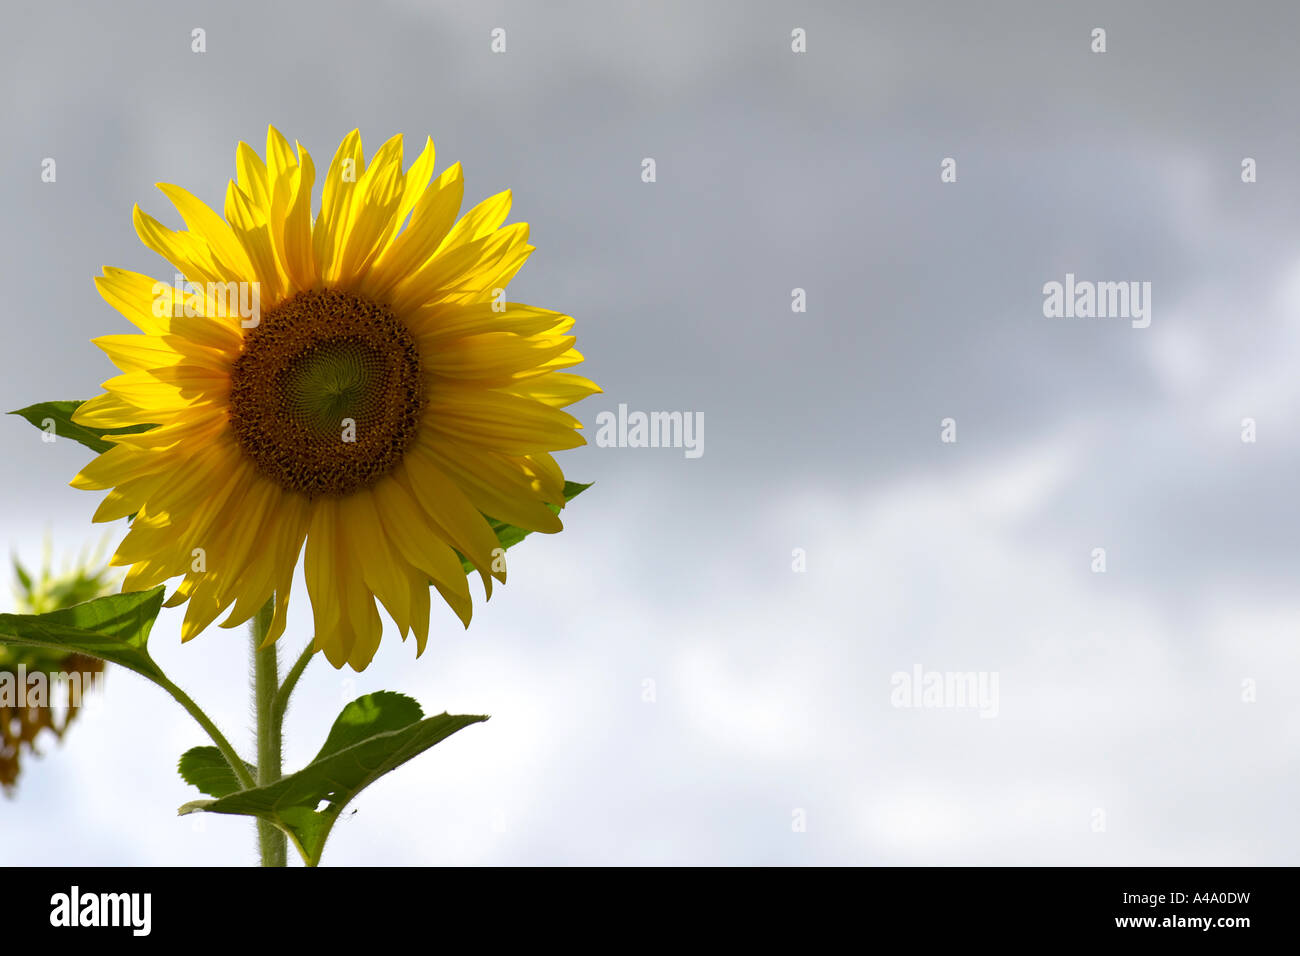 common sunflower (Helianthus annuus), inflorescence against cloudy sky, Germany, NRW Stock Photo